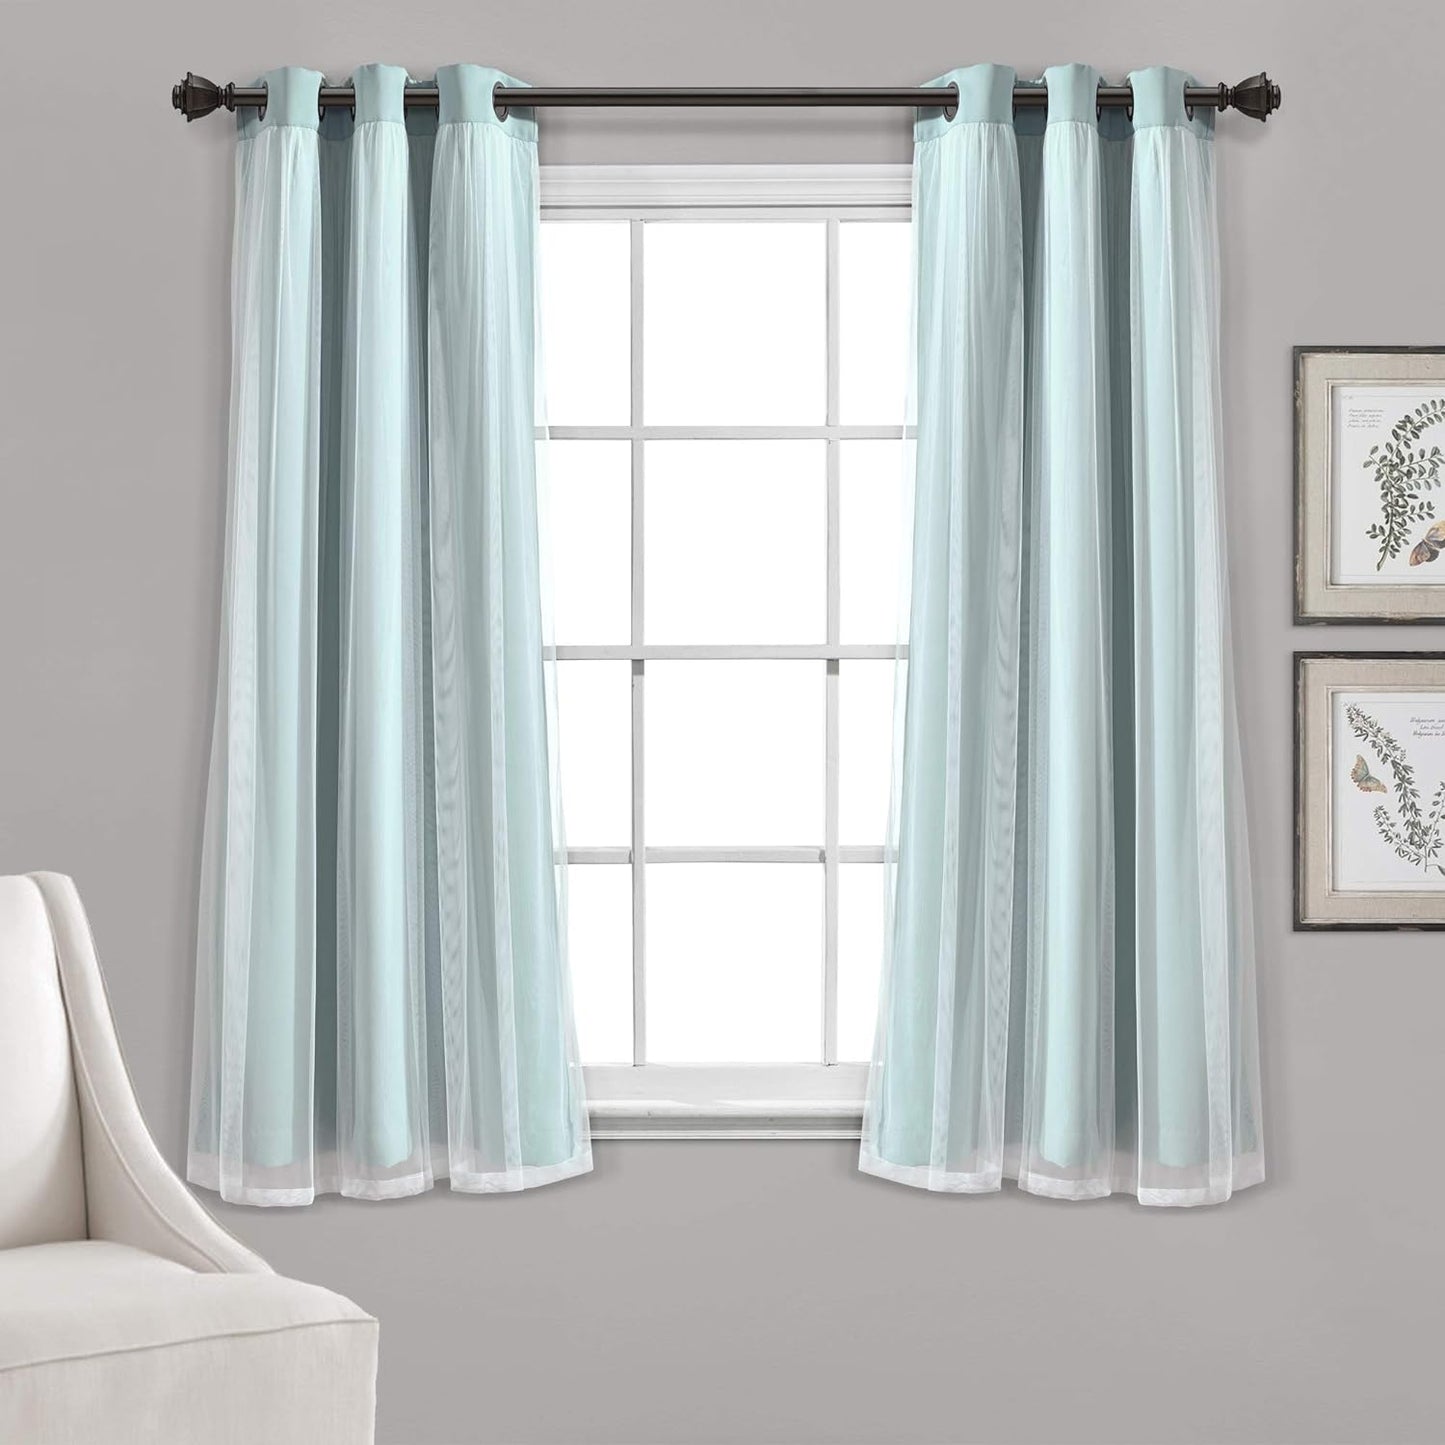 Sheer Grommet Curtains with Insulated Blackout Lining, Window Curtain Panels, Pair, 38"W X 63"L, Blue- Curtain with Sheer Overlay, Elegant Blackout Curtains for Bedroom